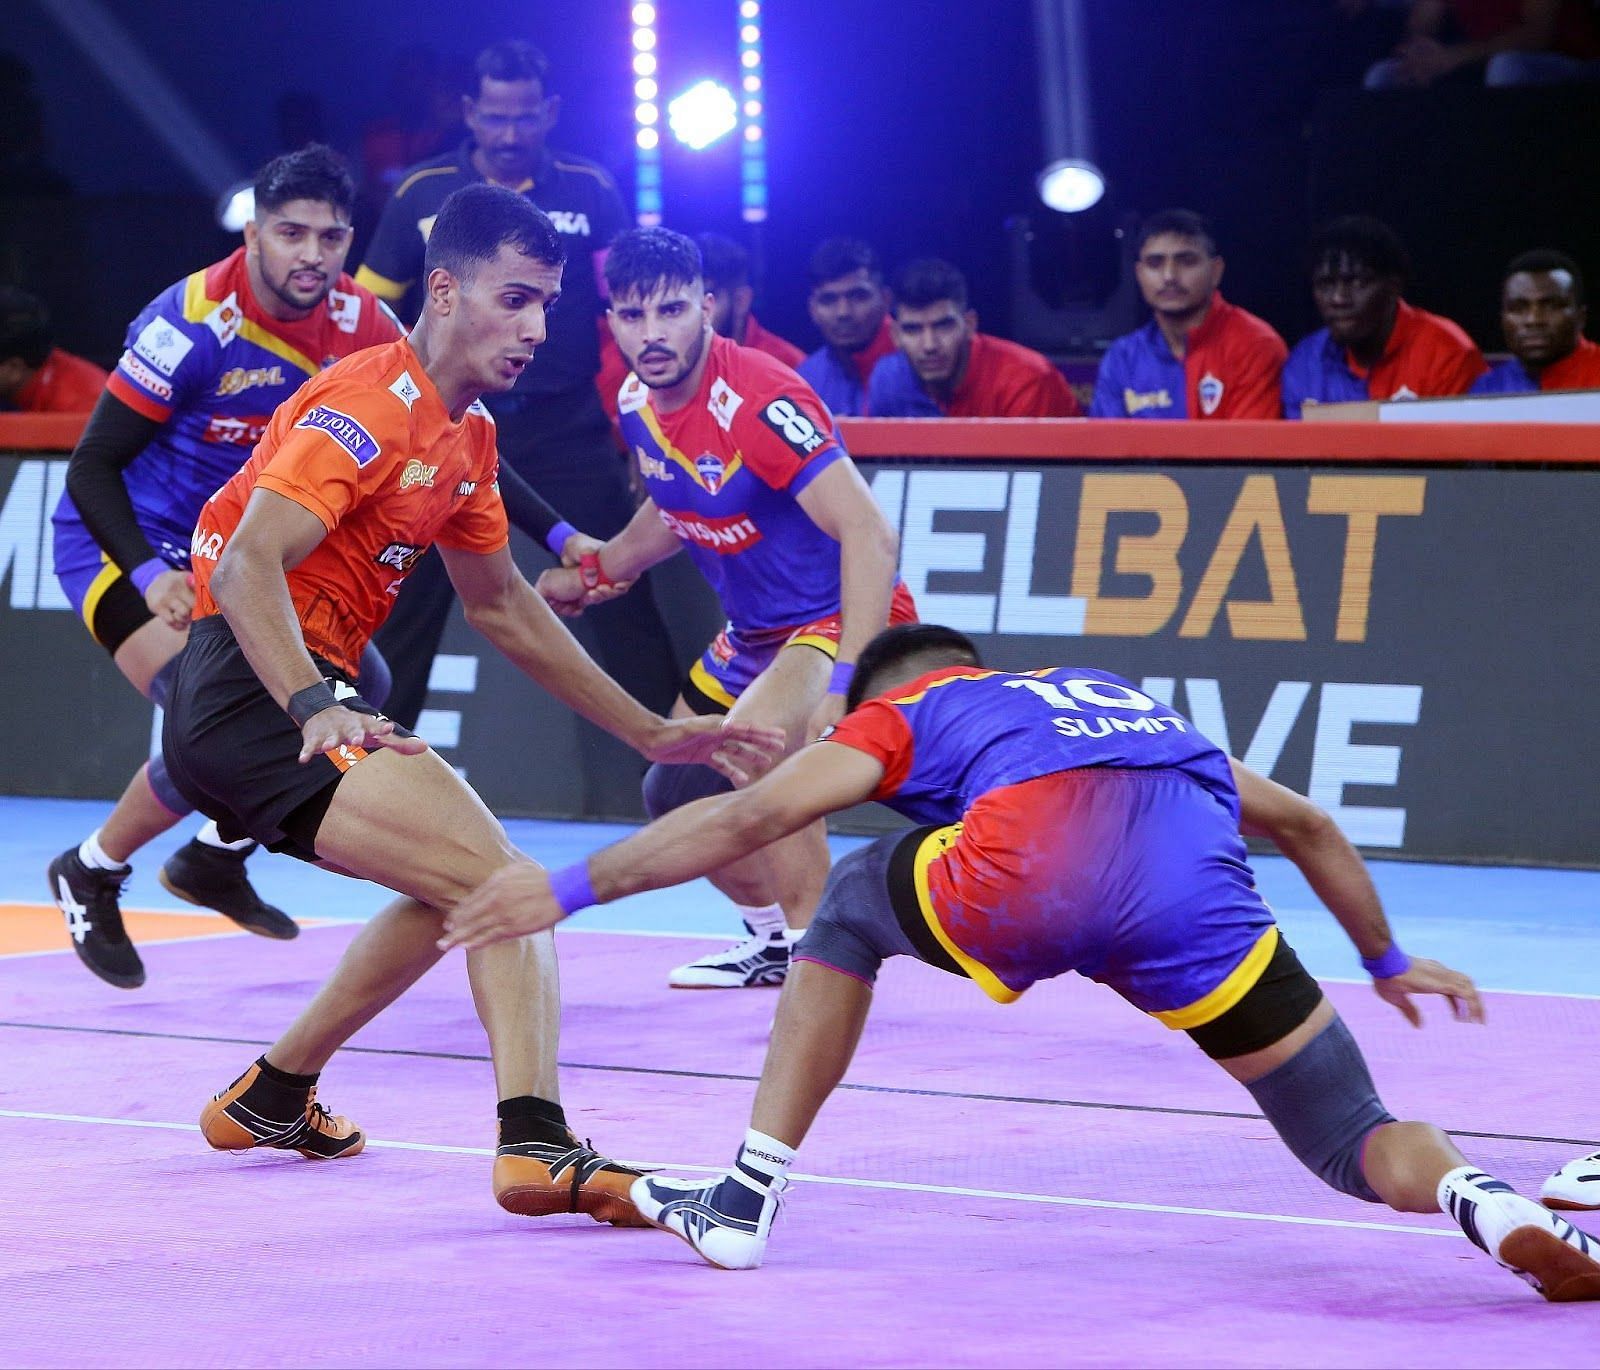 Sumit attempting a double thigh-hold of Amirmohammad Zafardanesh (Credits: PKL)